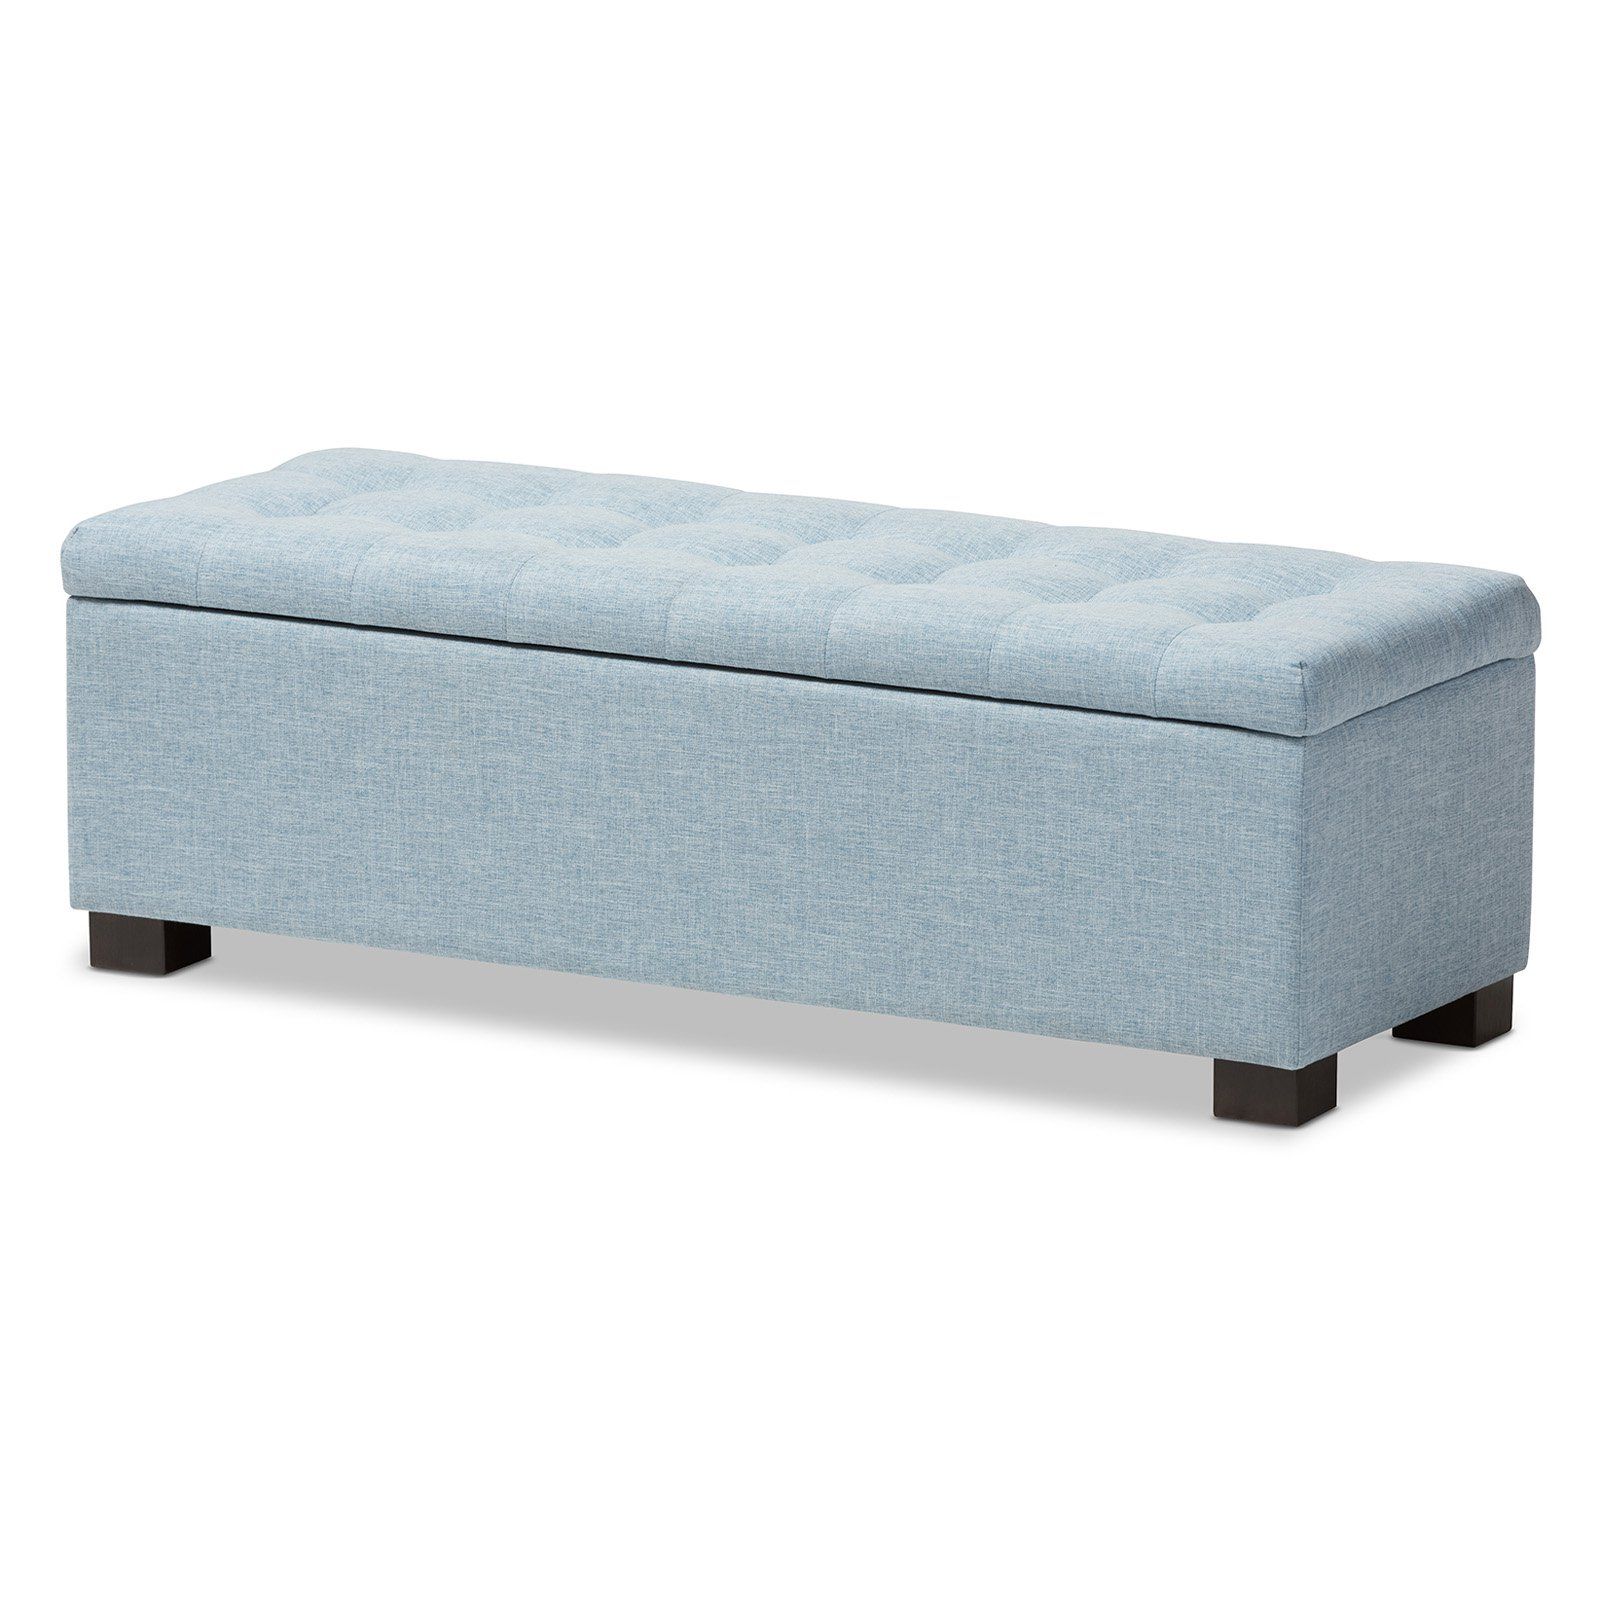 Baxton Studio Roanoke Light Blue Fabric Upholstered Storage Ottoman For Dark Blue Fabric Banded Ottomans (View 14 of 20)